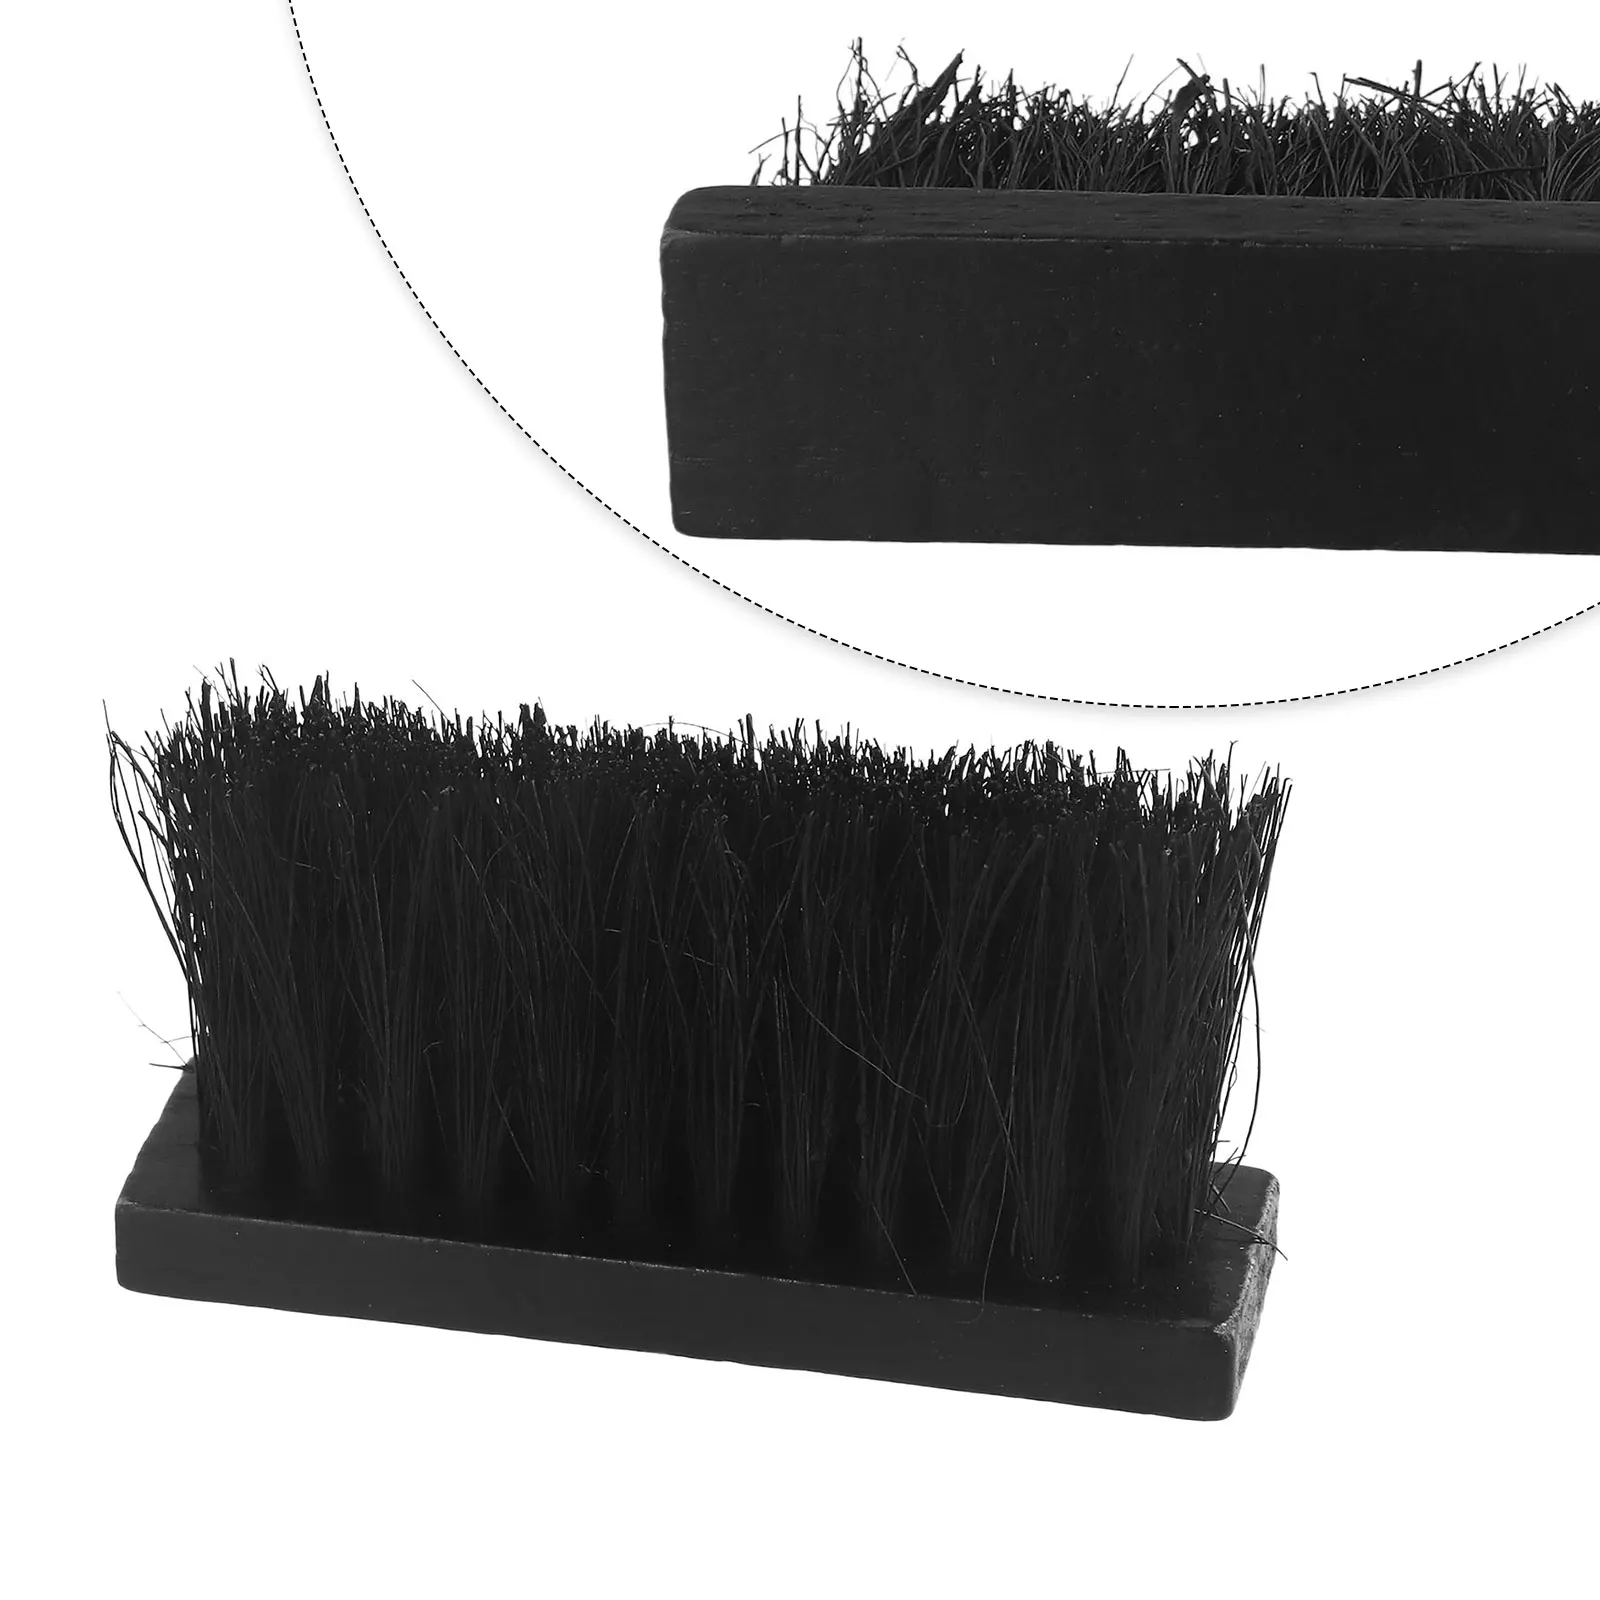 cleaning brushes fireplace brush black brush head fire hearth fireplace fireside refill cleaning square home brand new Cleaning Brushes Fireplace Brush 13.5x3.5x1.3cm Black Brush Head Fireplace Fireside Refill Cleaning Square Home Brand New